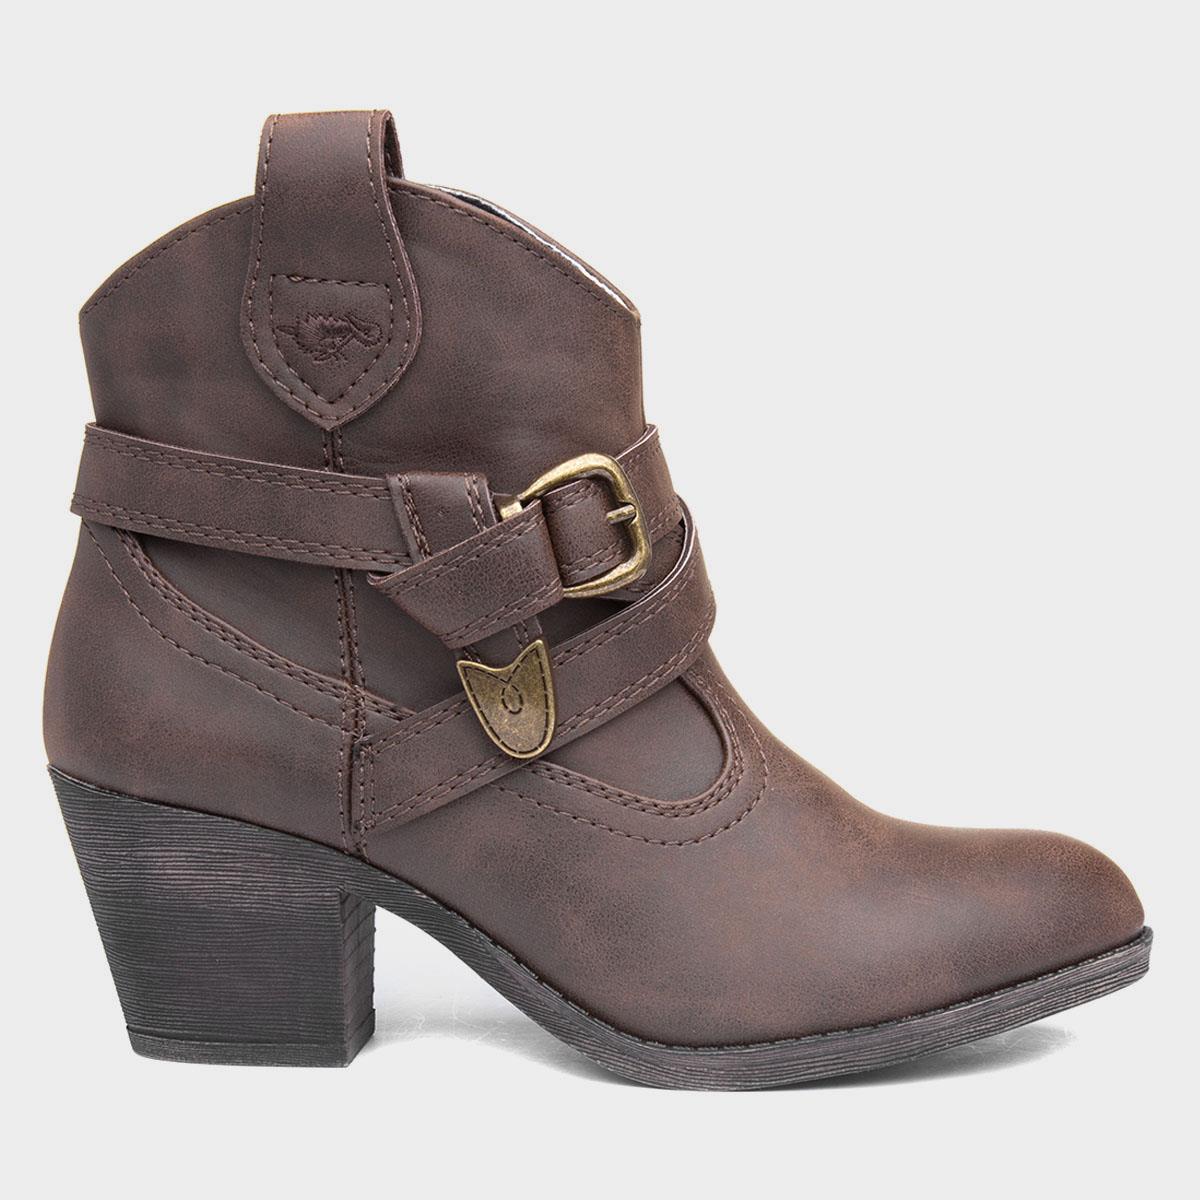 Rocket Dog Satire Graham Womens Brown Ankle Boot-18250 | Shoe Zone